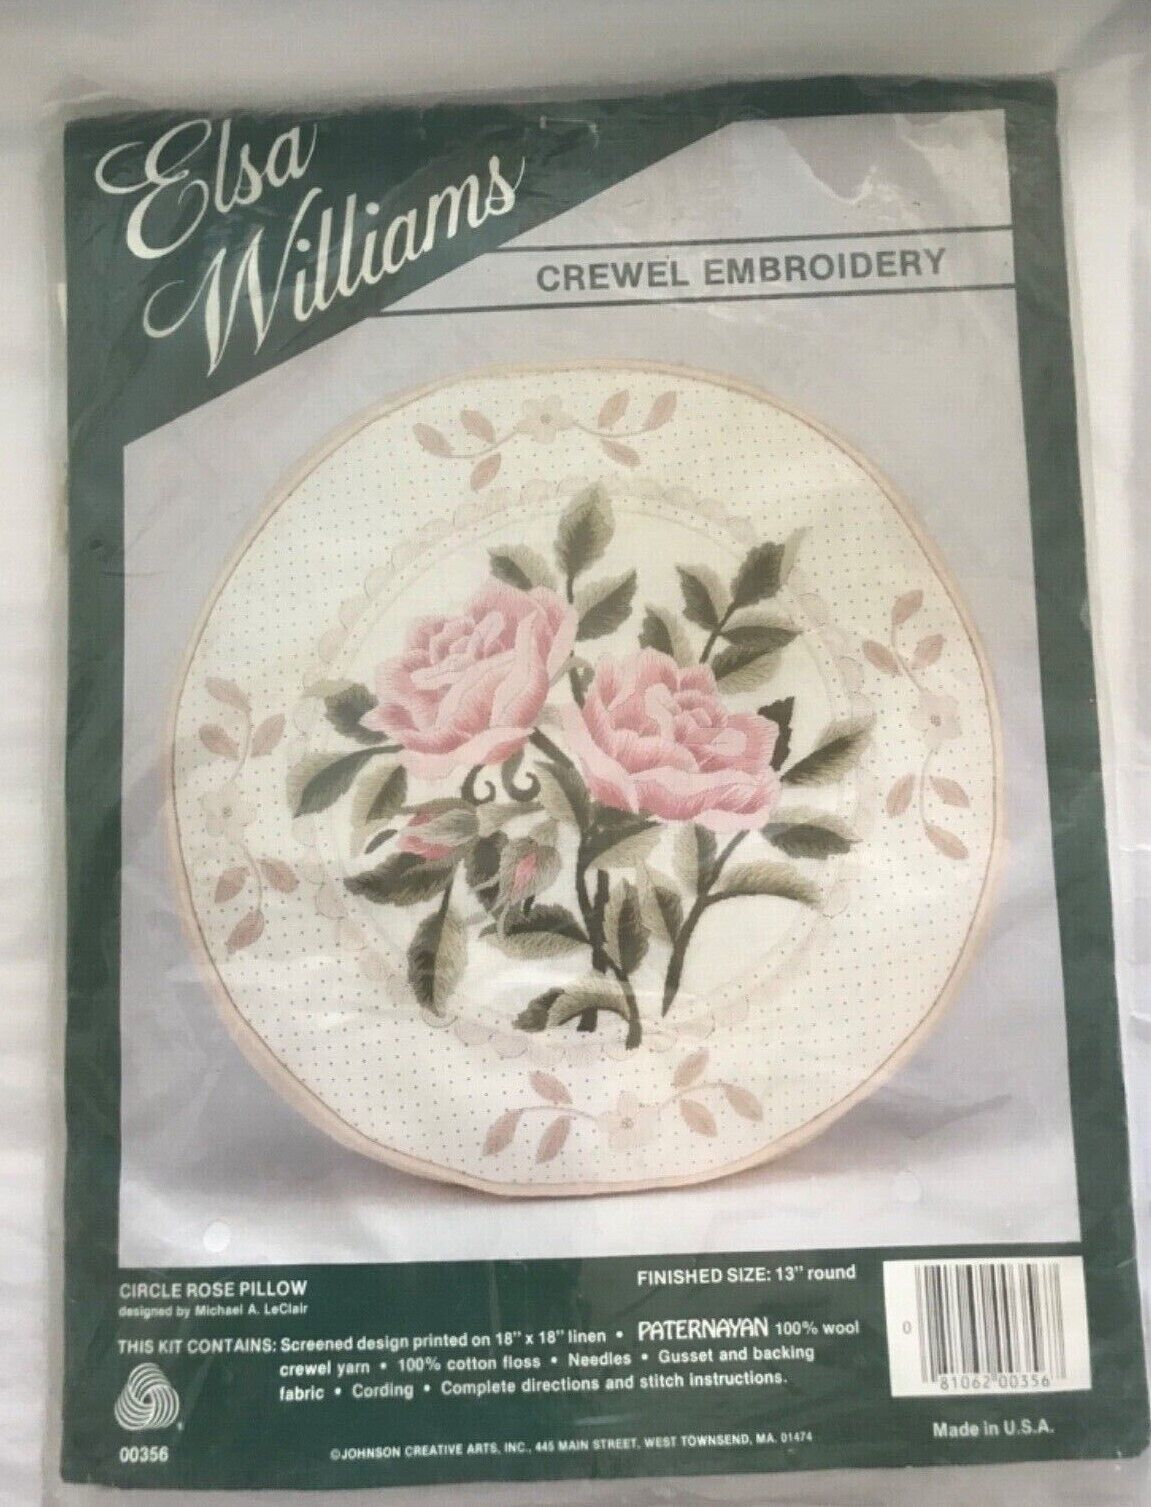 Primary image for Elsa Williams Crewel Embroidery Kit CIRCLE ROSE PILLOW 13'' round. READ!! please